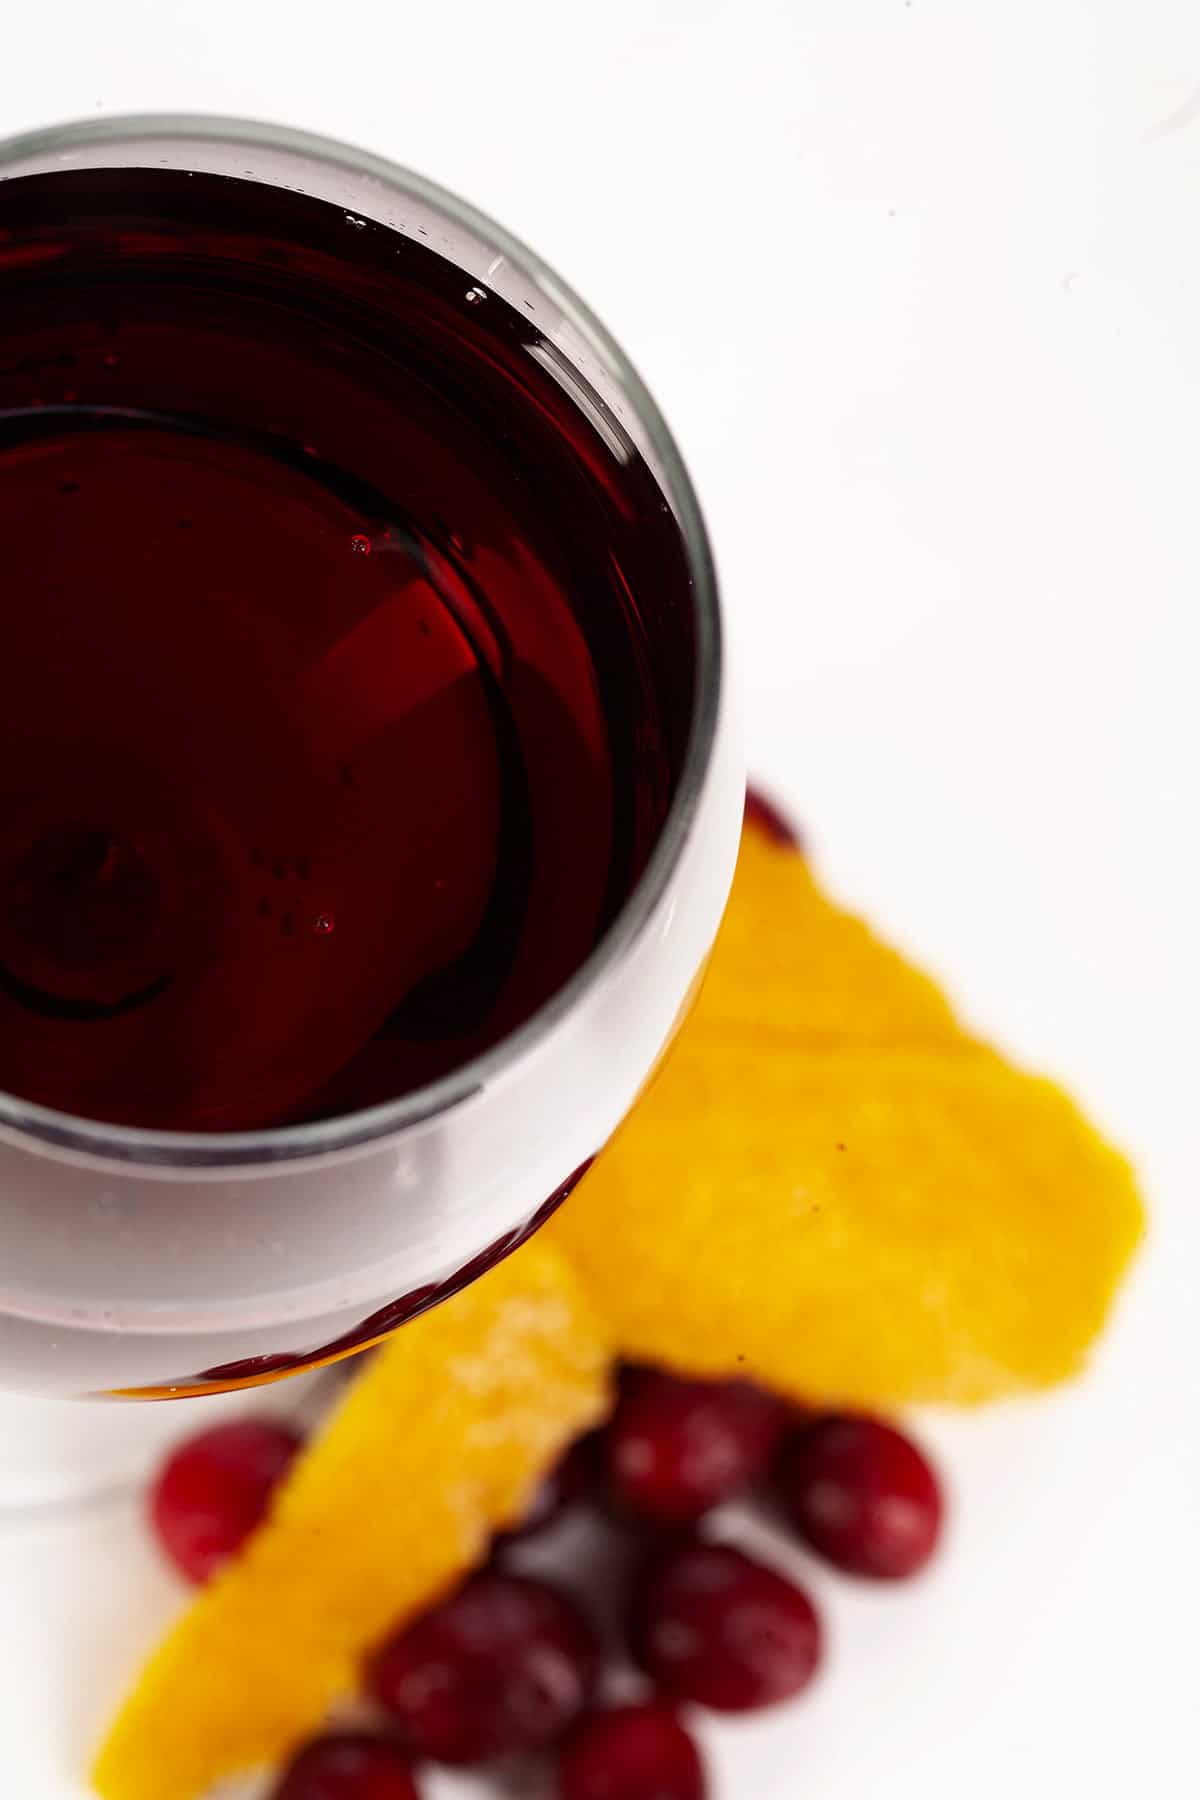 A close up view of a wine glass with with a deep red wine. There are cranberries and orange peels at the base of the glass, against a white background.